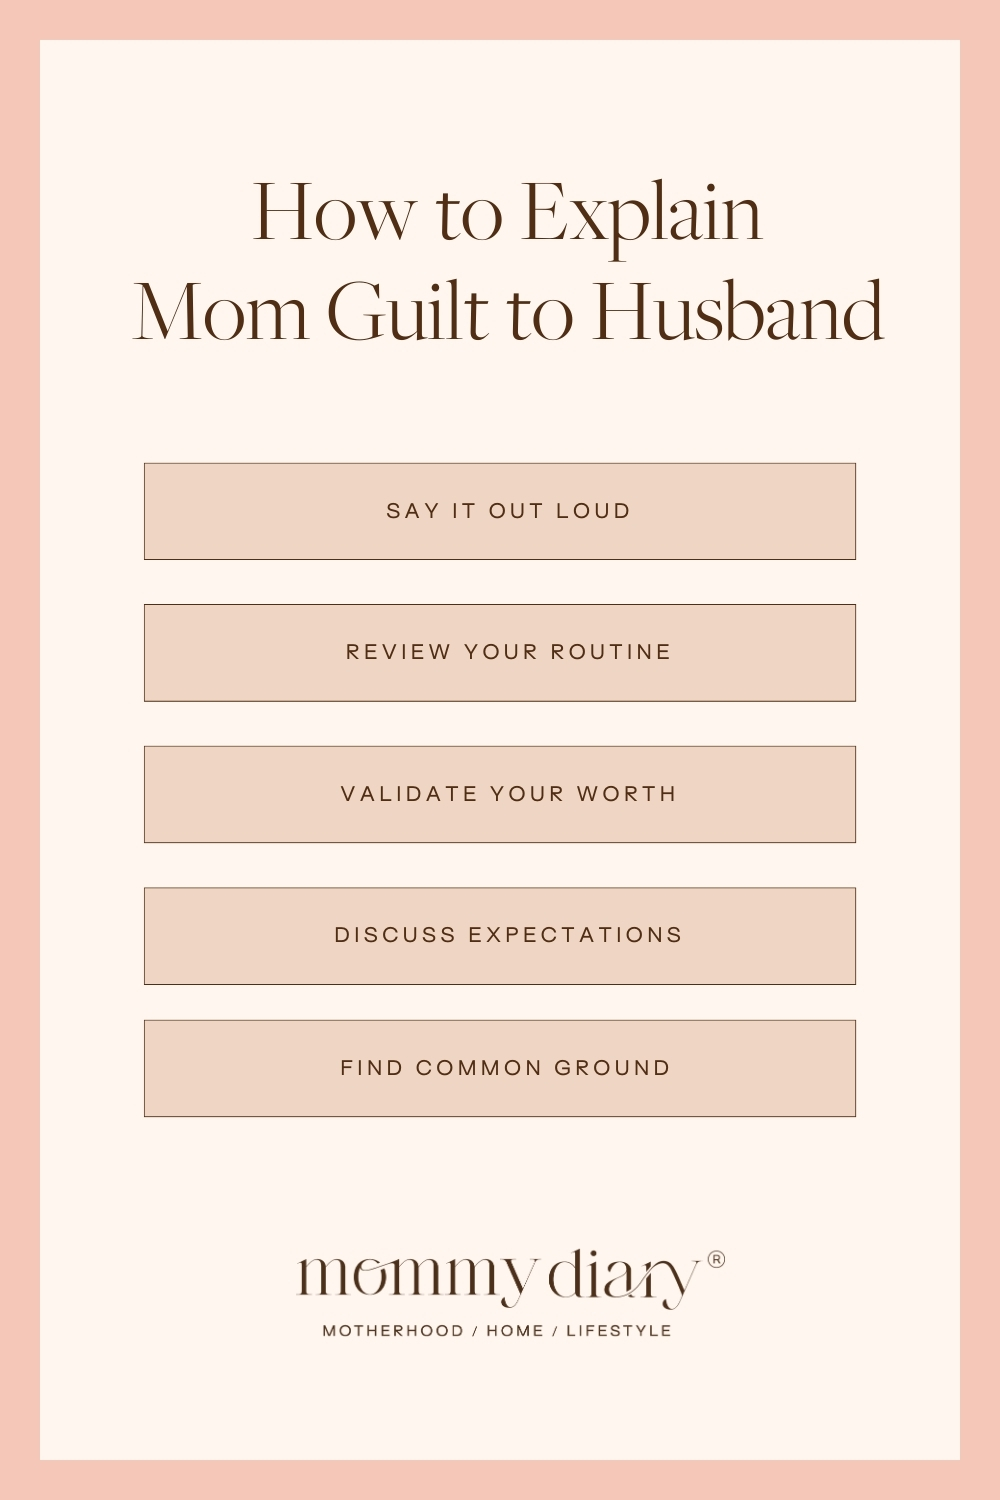 How to Explain Mom Guilt to Husband